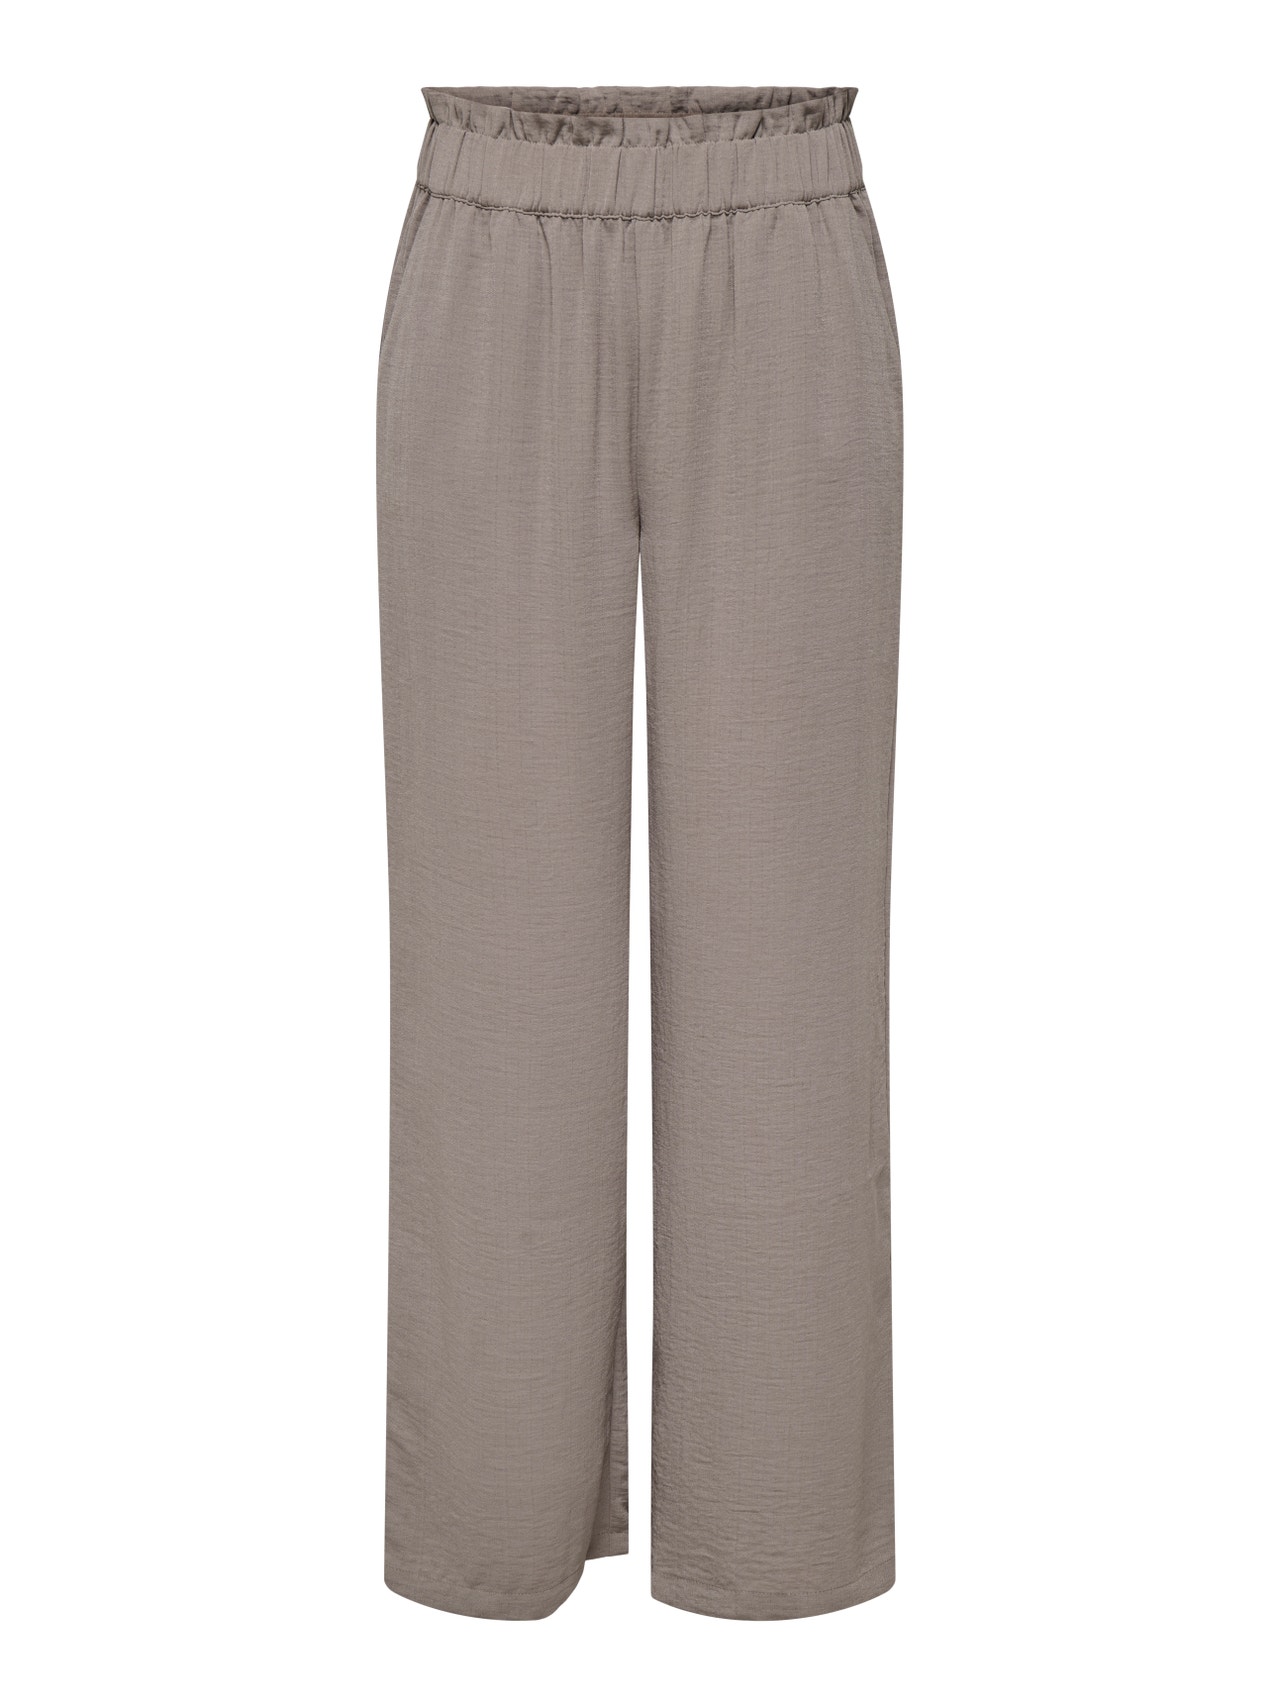 ONLY Highwaisted Wide Pants -Driftwood - 15271184